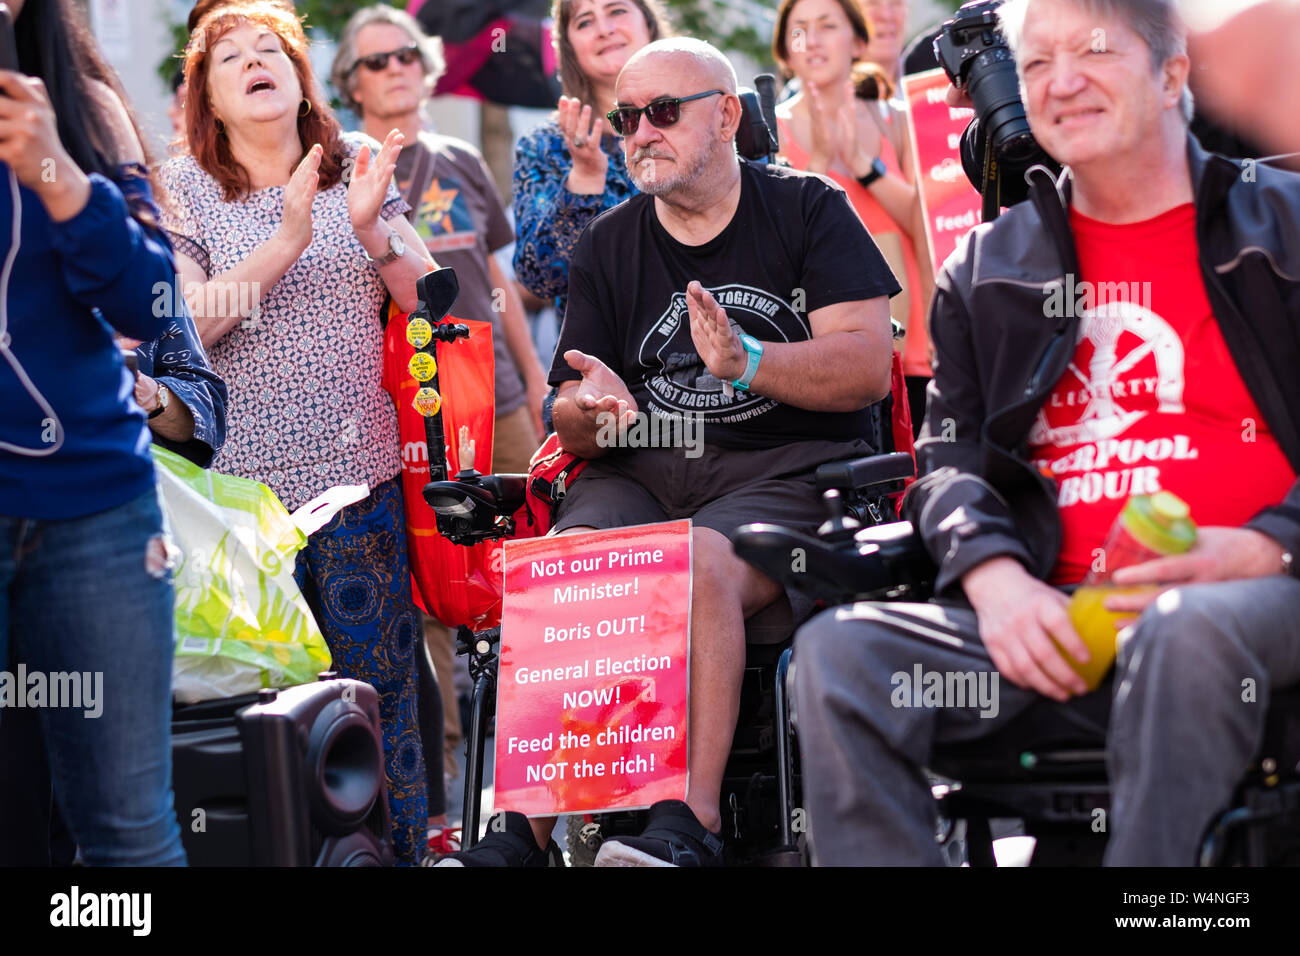 Liverpool, UK. July 24, 2019. Following today's proceedings in London where Boris Johnson took over from Theresa May as the Prime Minister of the United Kingdom, a rally was held in Williamson Square in Liverpool, north west England, against Boris Johnson becoming Prime Minster. Around 100 people attended, some holding banners and placards referring to the new Prime Minster, whilst some participants made speeches. Credit: Christopher Middleton/Alamy Live News Stock Photo